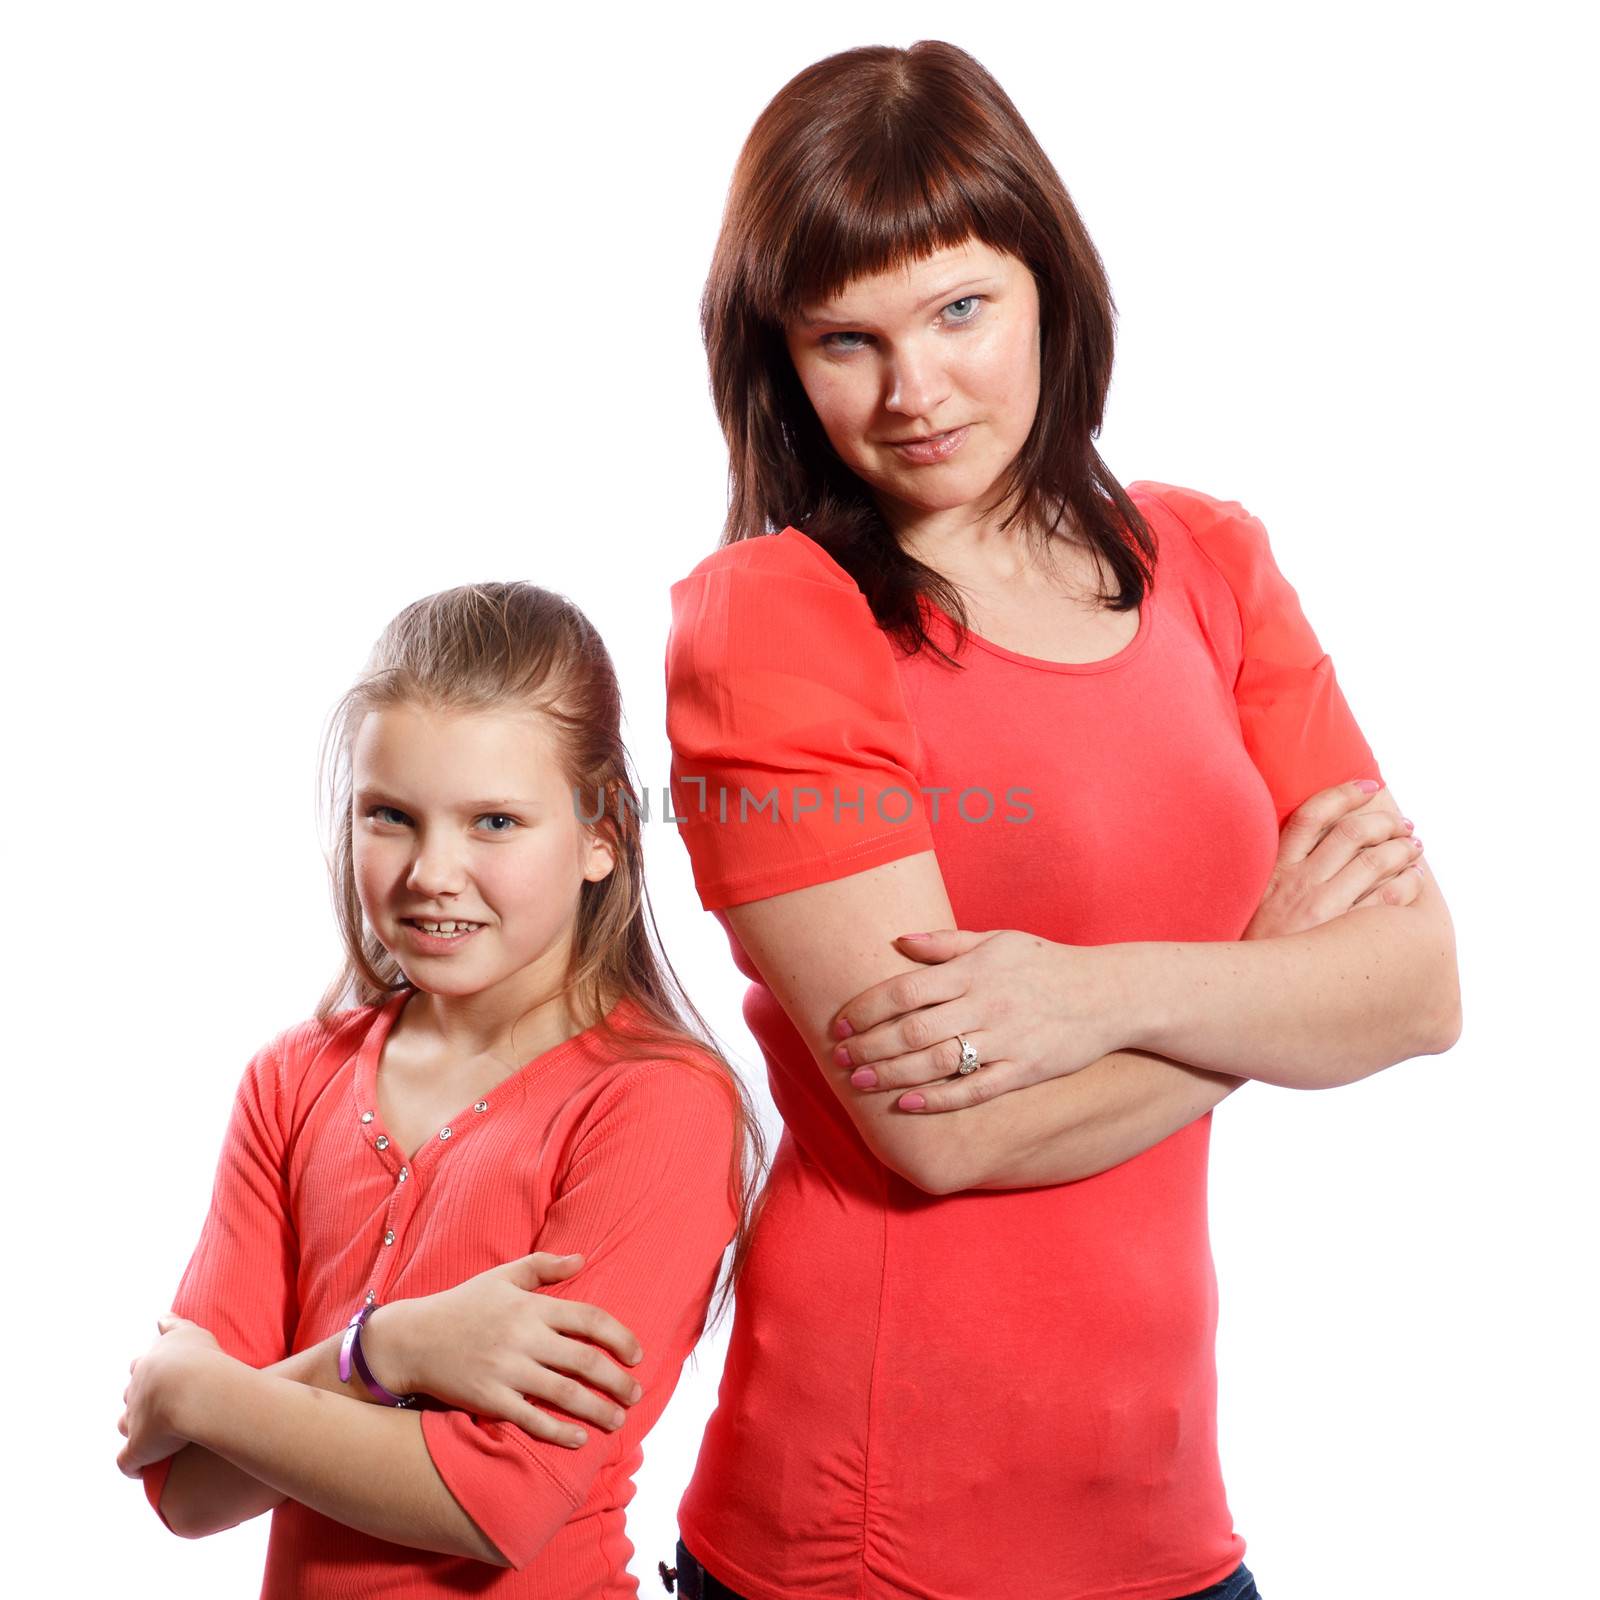 Mother and daughter standing with arms crossed on a white background